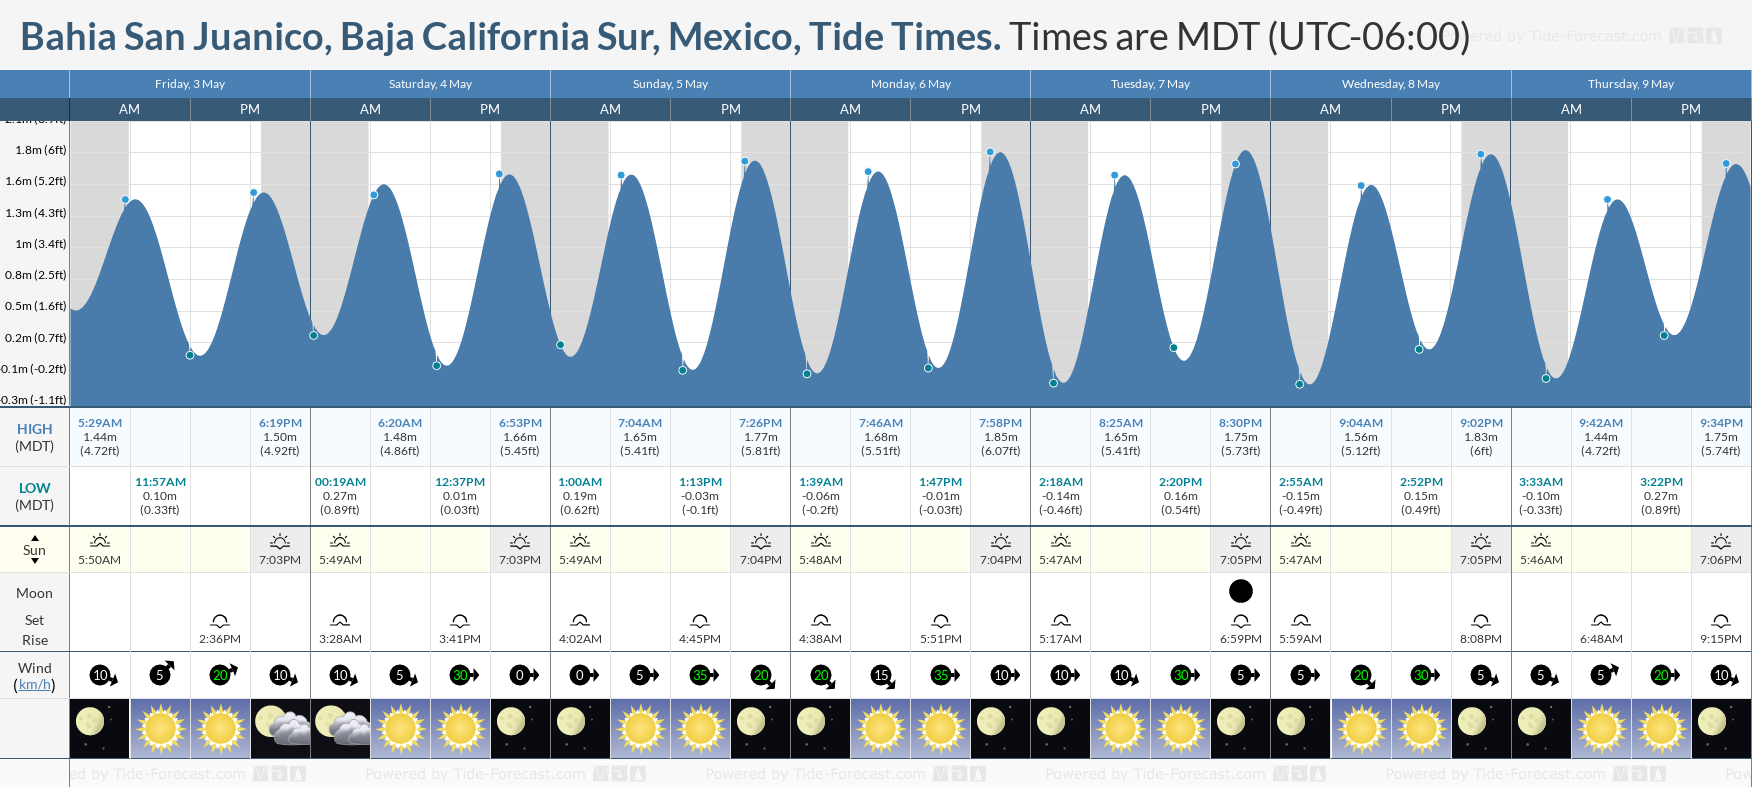 Bahia San Juanico, Baja California Sur, Mexico Tide Chart including high and low tide tide times for the next 7 days